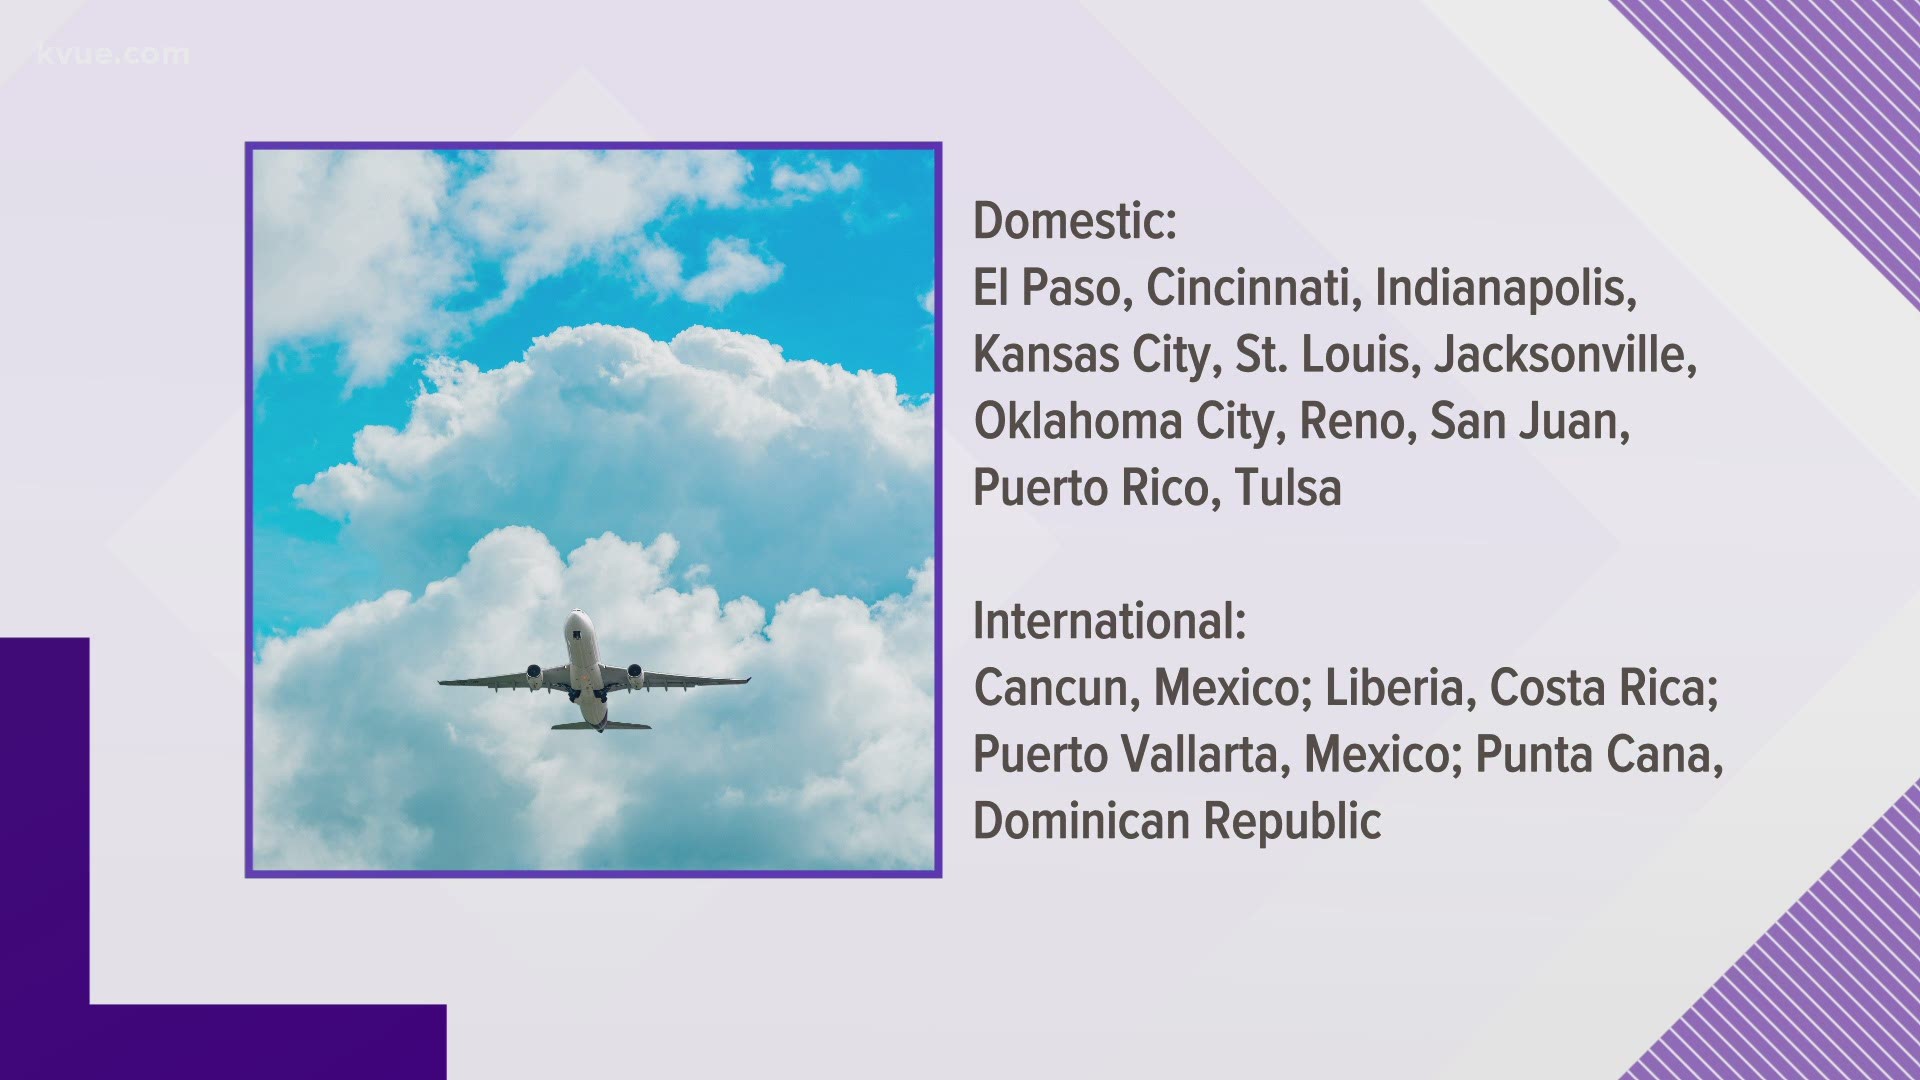 The flights include 10 new domestic and four new international destinations.